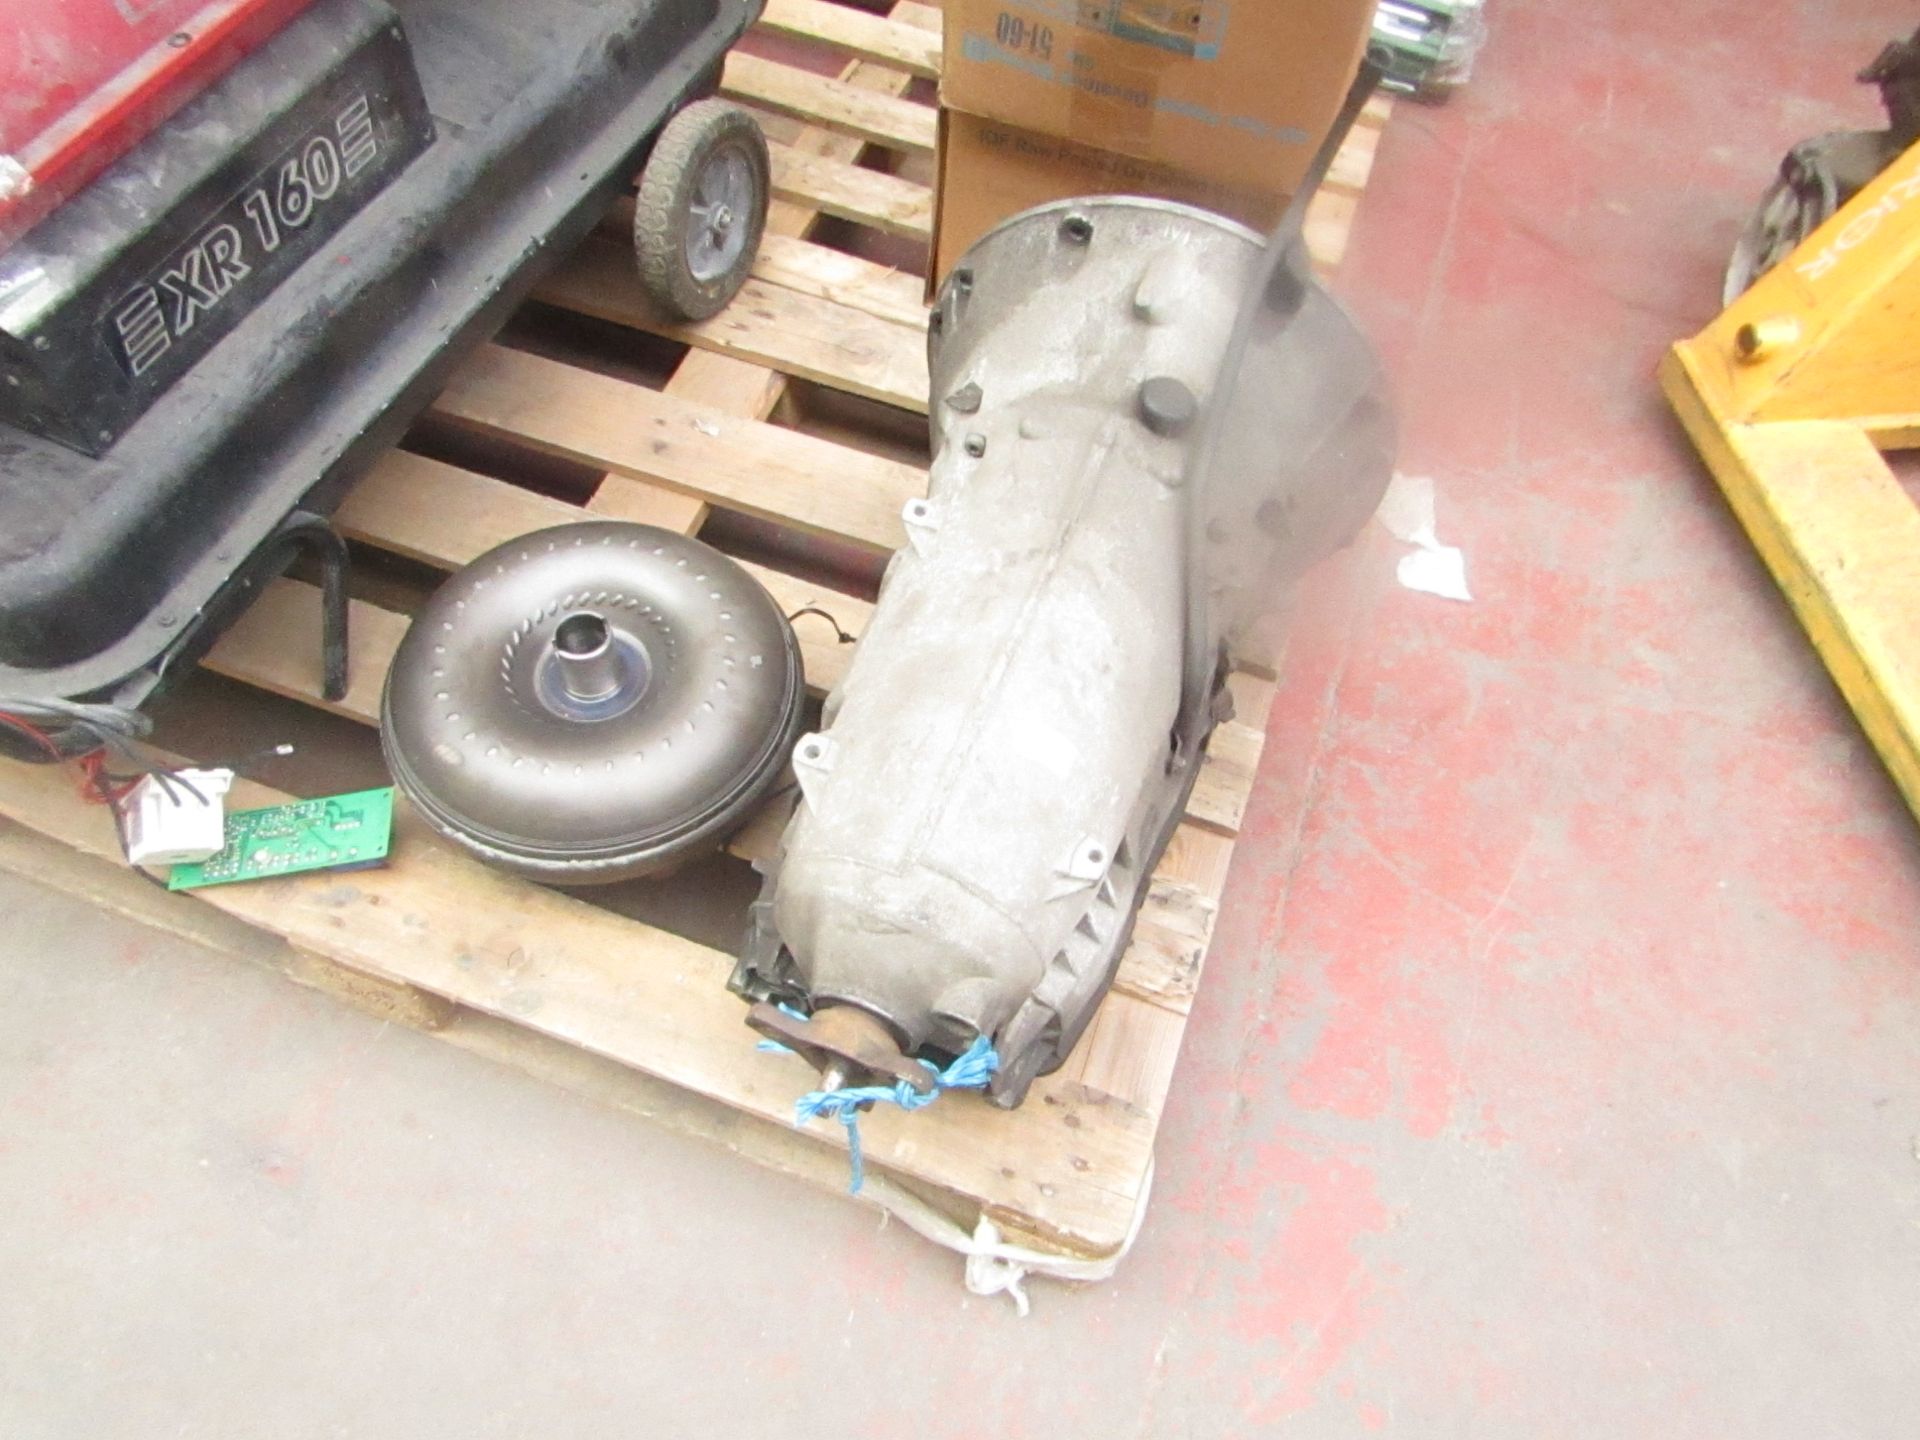 MERCEDES C CLASS W209 AUTOMATIC GEARBOX - Used Condition, Has Not Been Serviced For Some Time